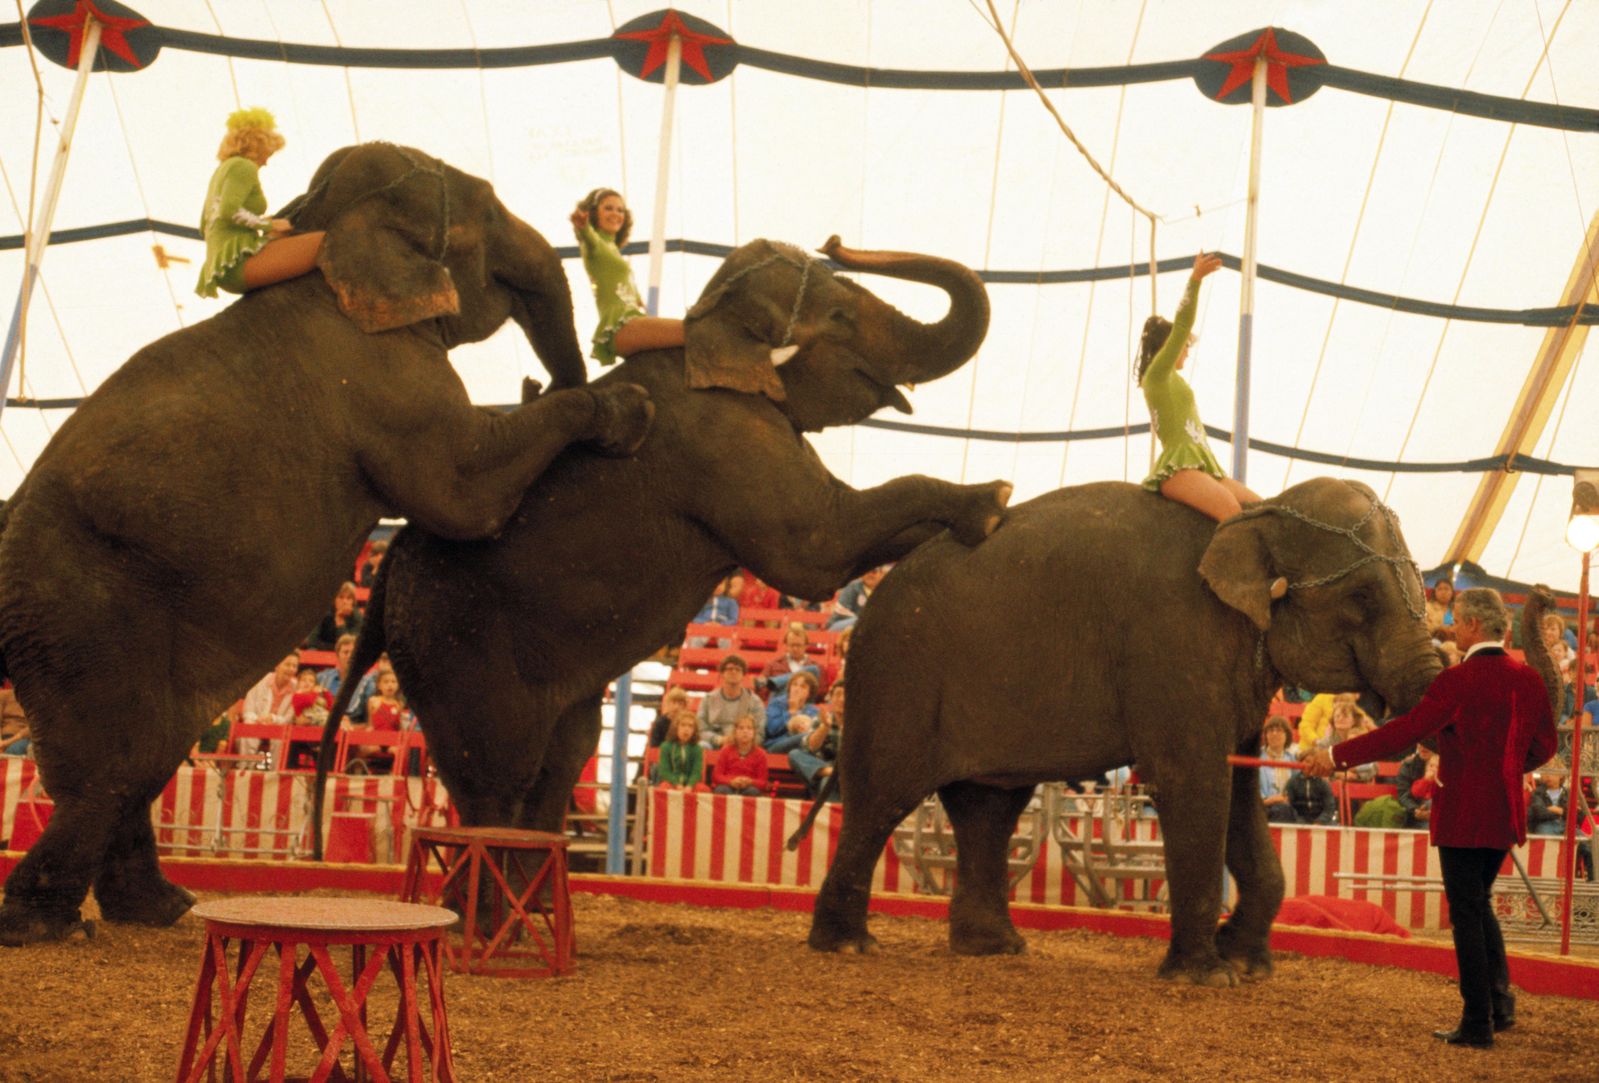 Ringling Brothers Is Phasing Out Its Elephant Act | Smart News| Smithsonian  Magazine